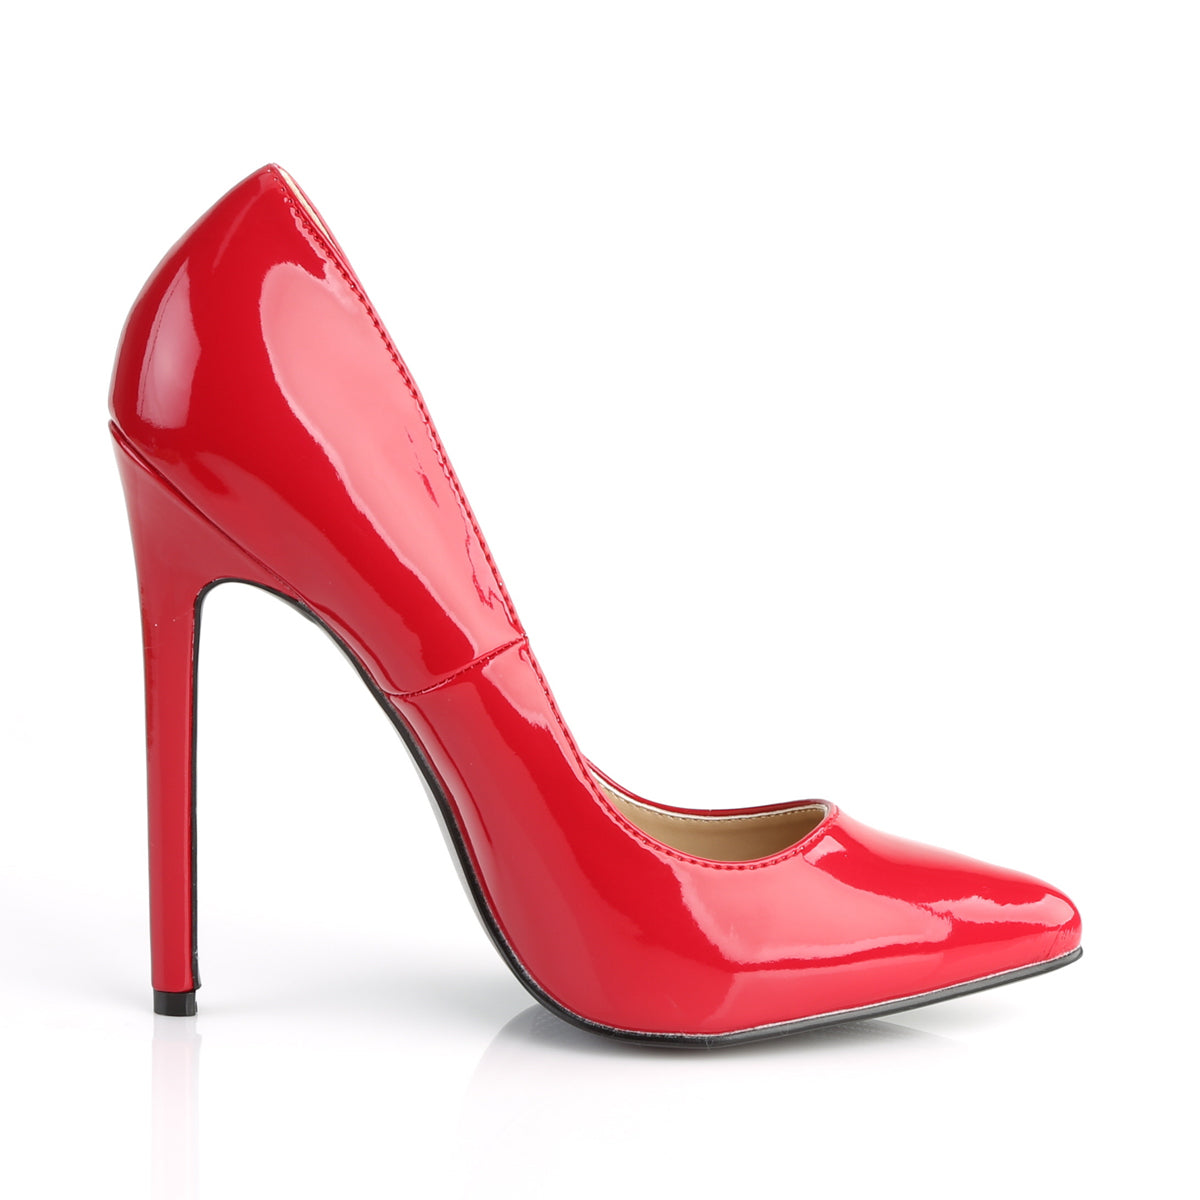 SEXY-20 Red Patent Pump Pleaser